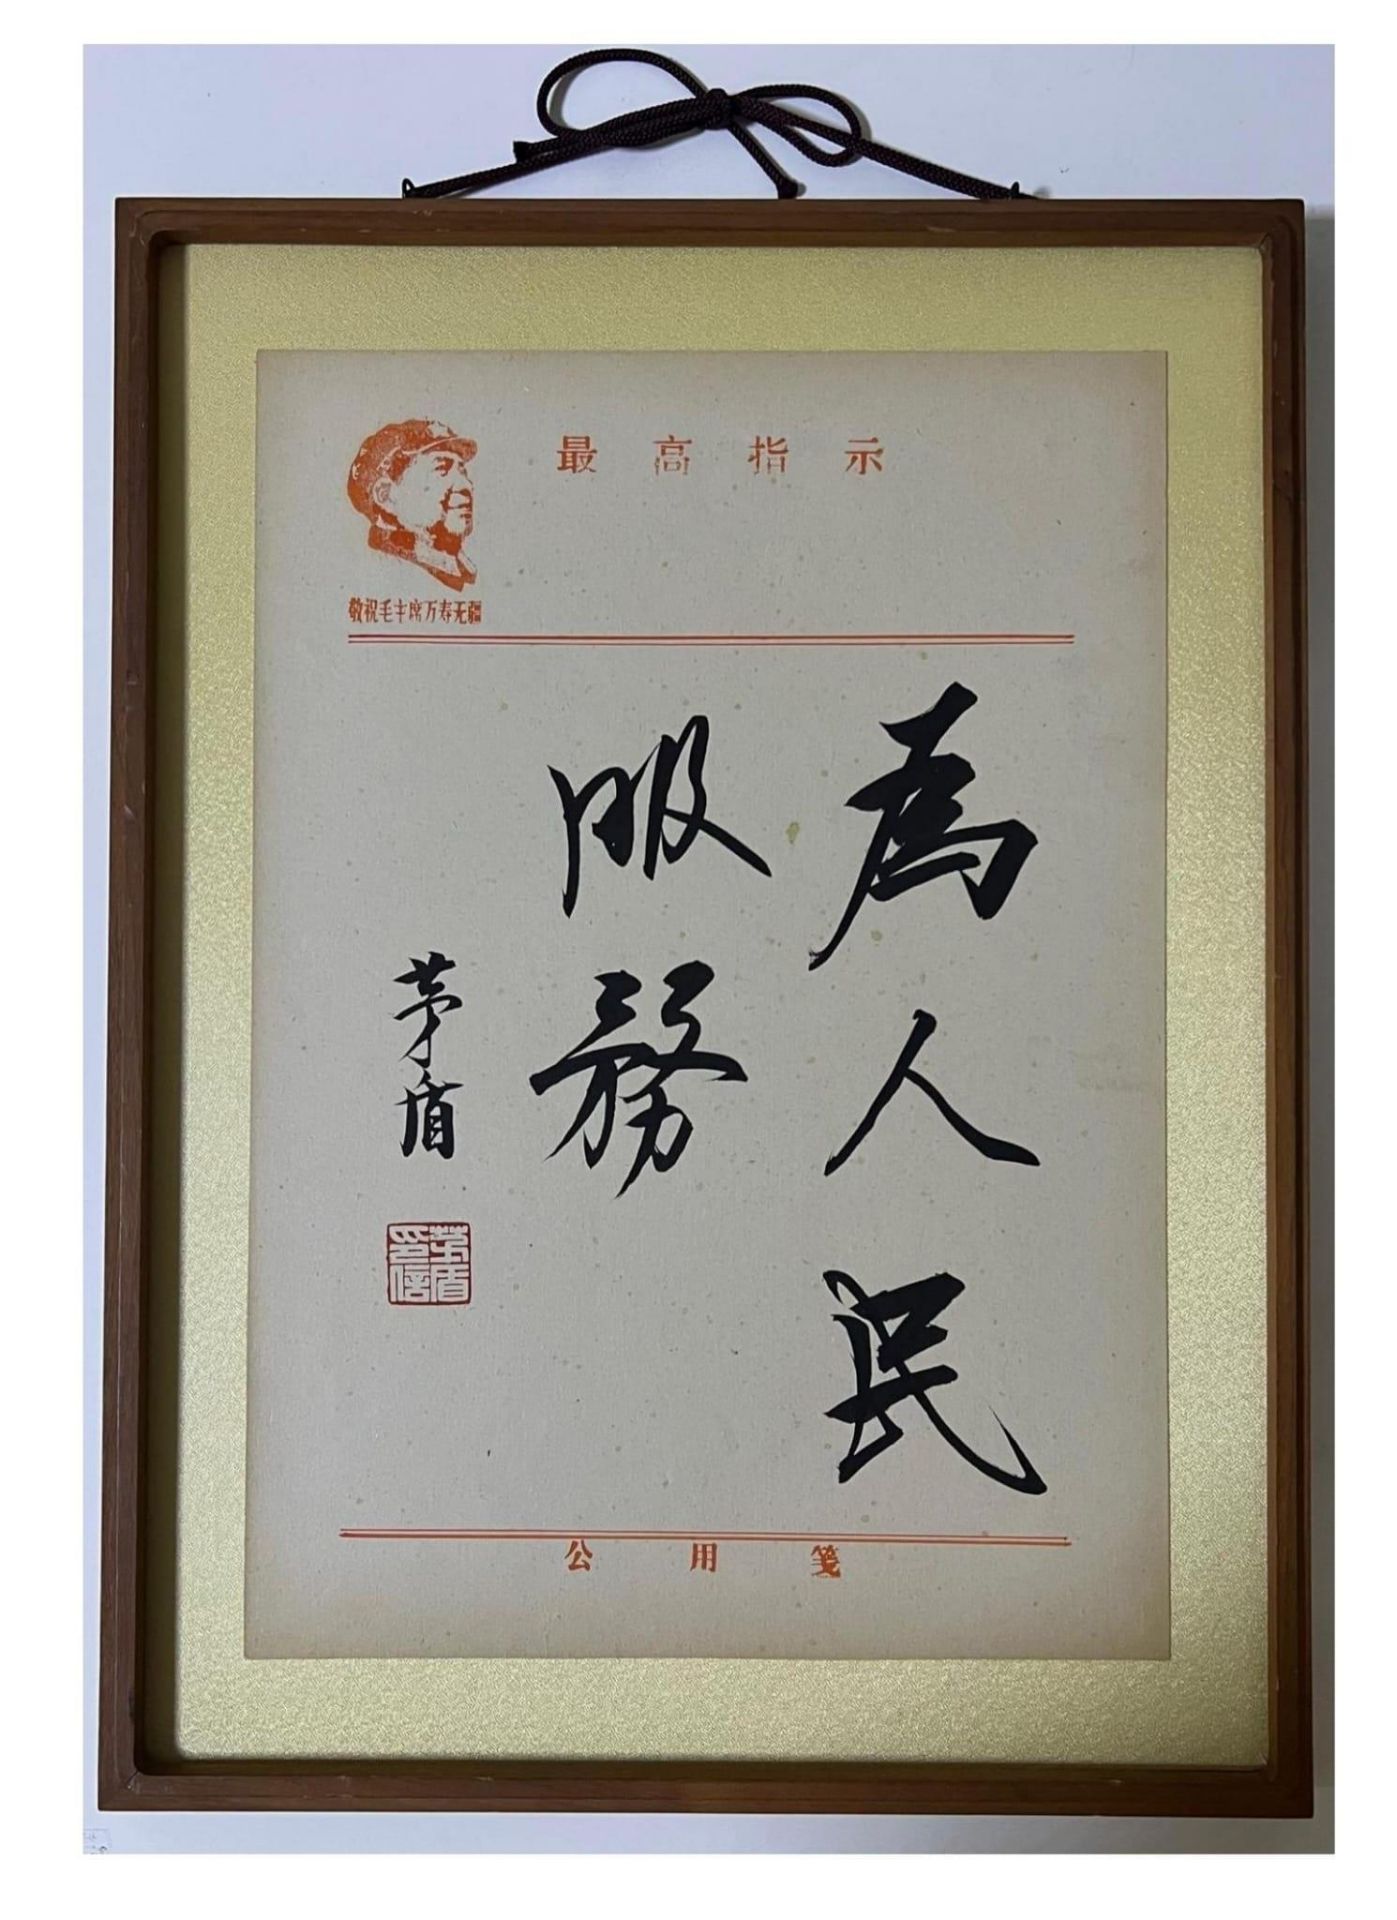 “To serve the people” Calligraphy with frame. Attributed to Mao Dun - 1896 -1981. Mao Dun was a